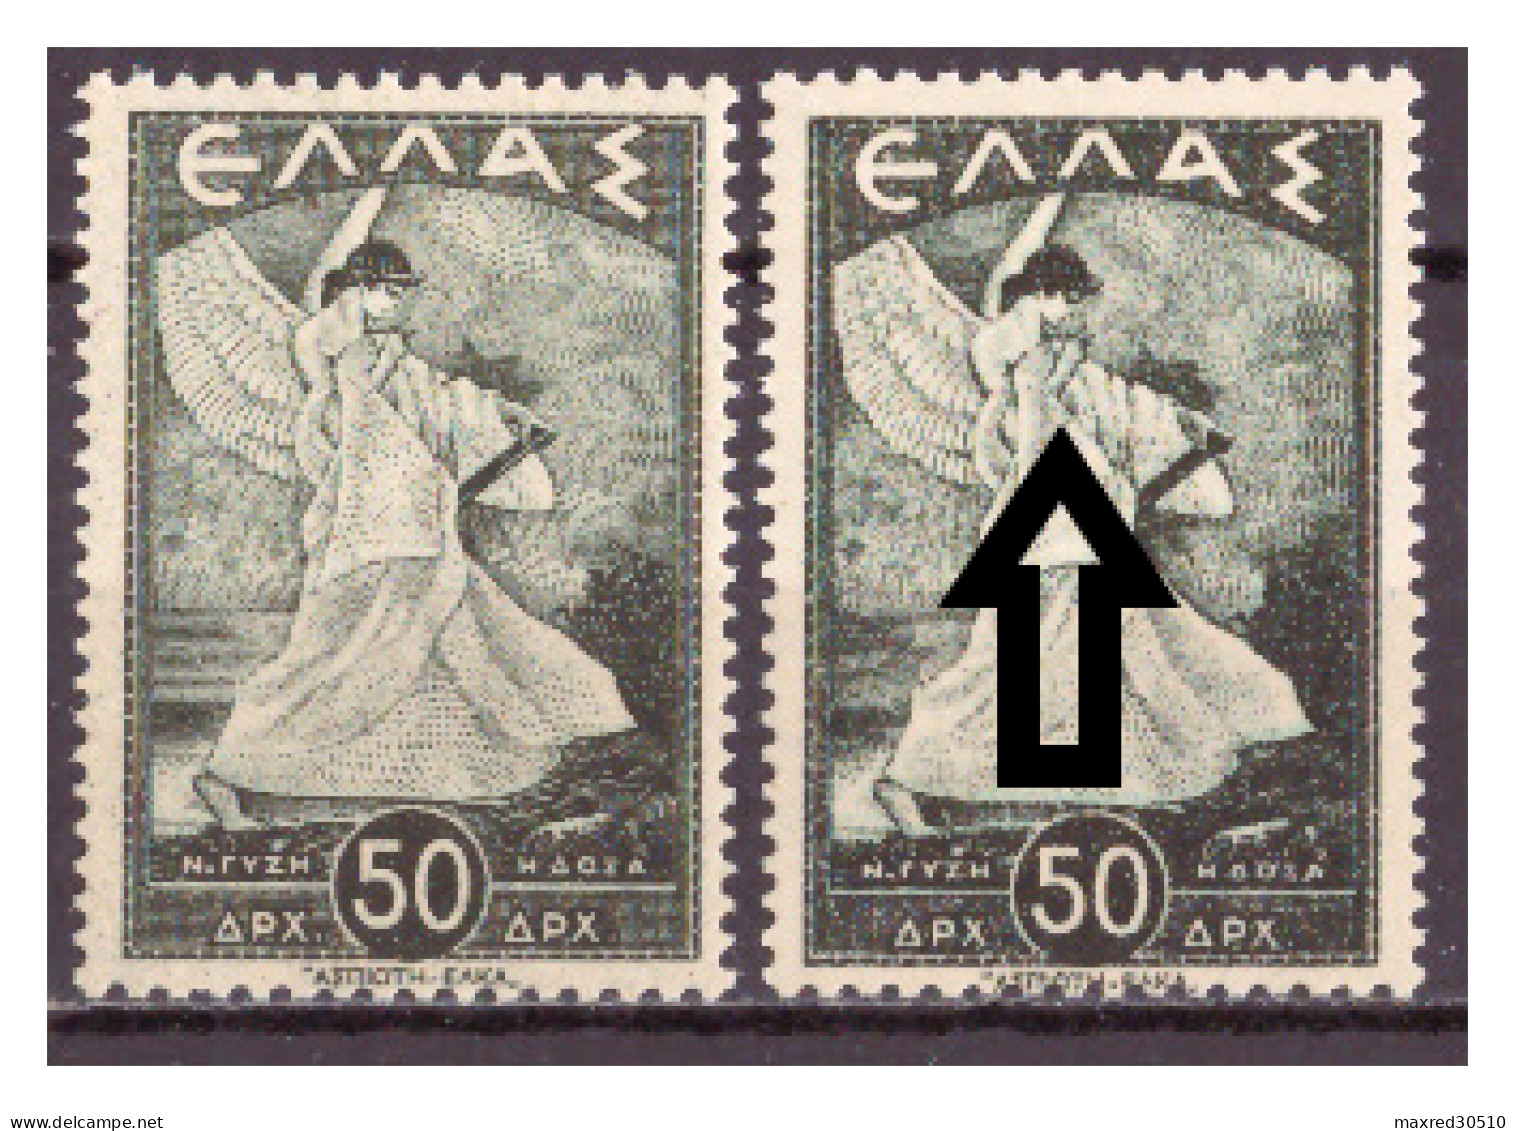 GREECE 1945 2X50L. OF THE "GLORY ISSUE" THE 2ND ONE (SEE ARROWS) WITH MIRROR PRINTING AT THE GUM ERROR MNH - Varietà & Curiosità